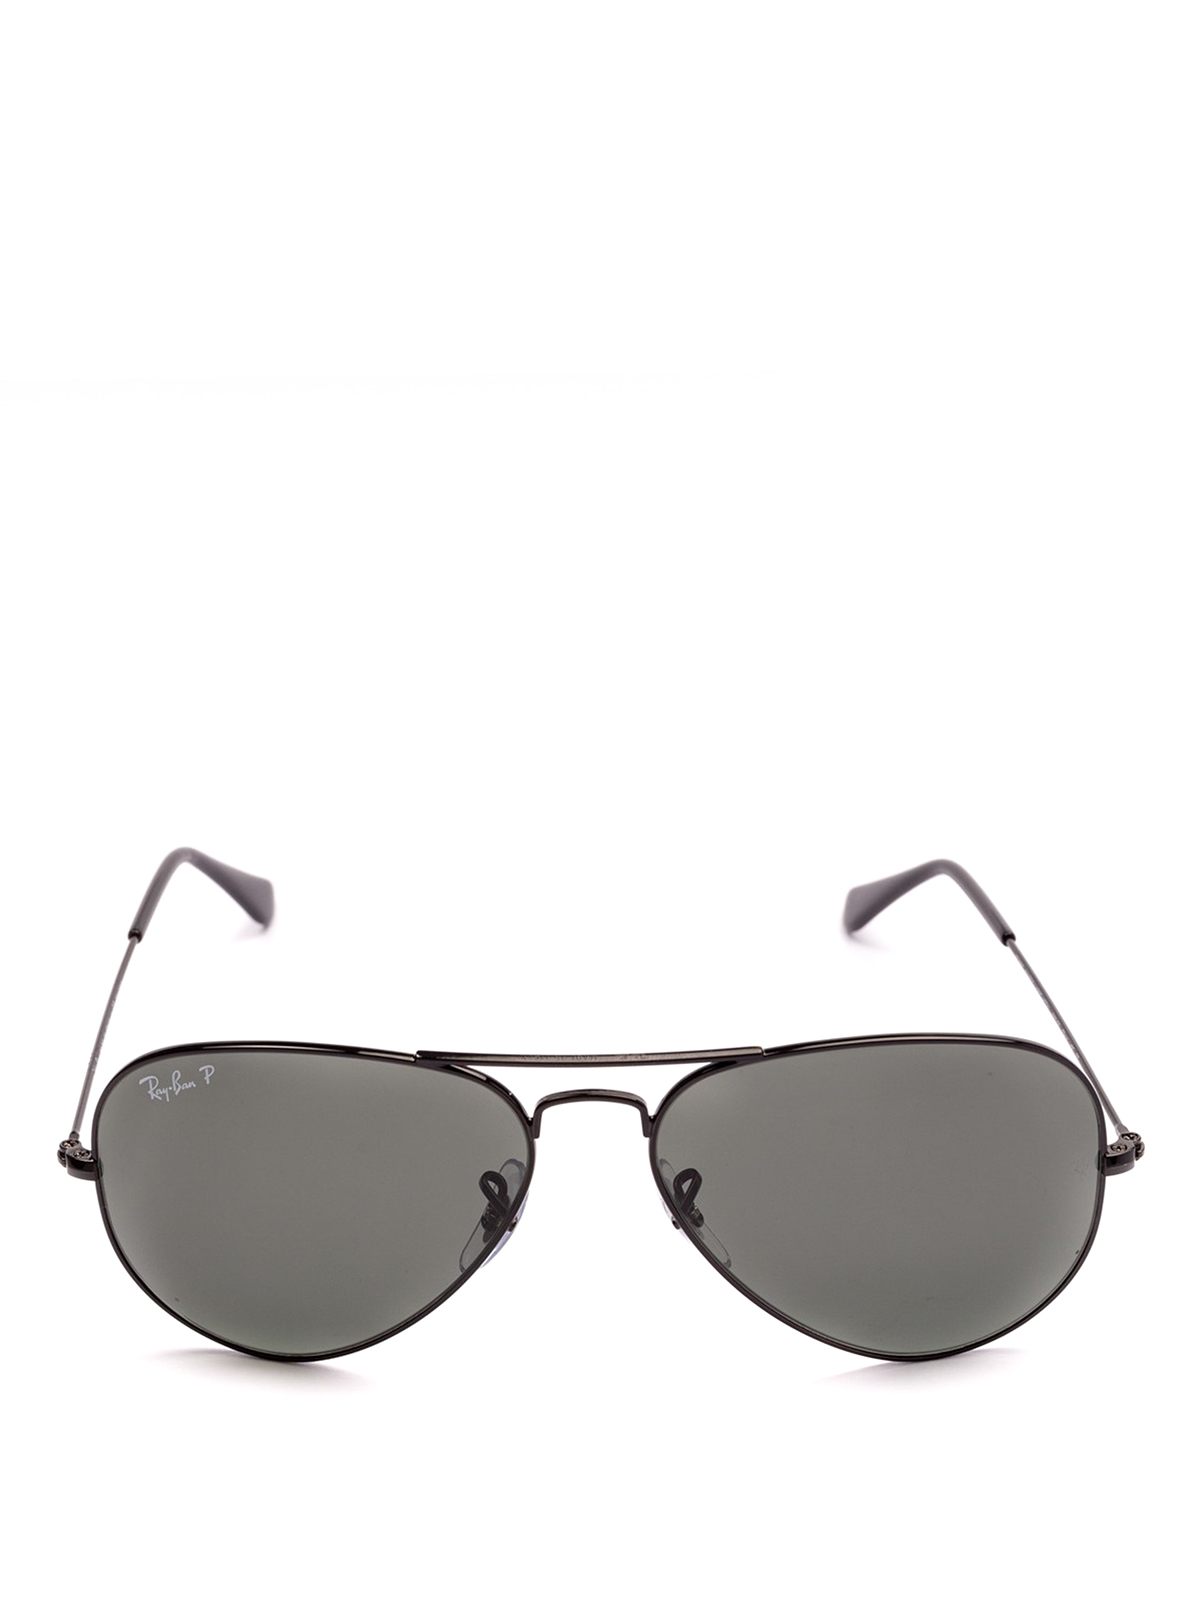 Buy Ray Ban Unisex Light Brown Square Injected Sunglass Online - 727736 |  The Collective